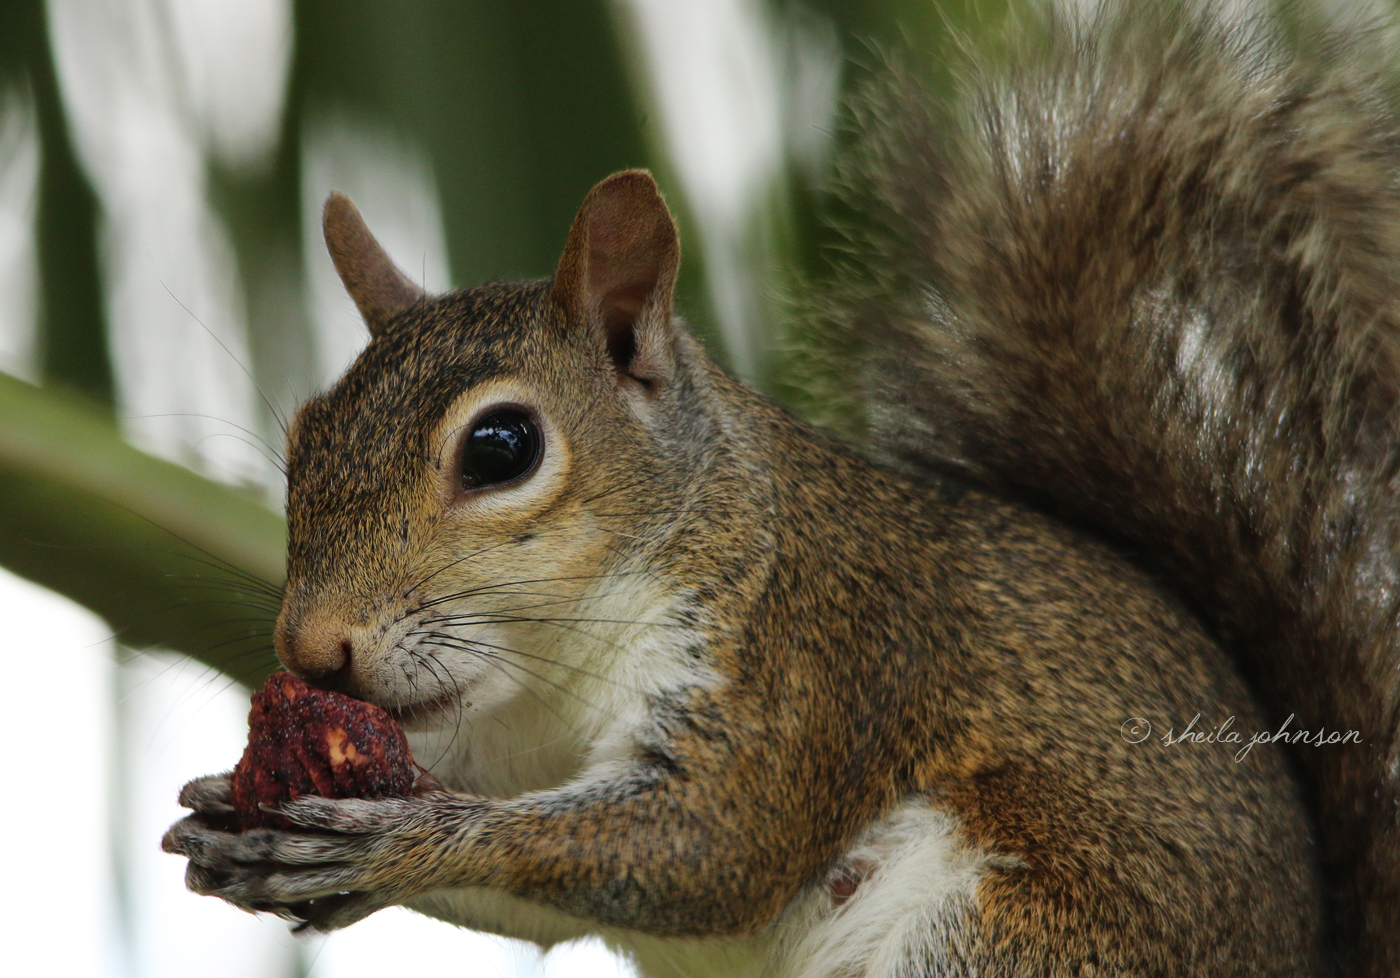 One Of The Many Picnickers Of Rivergate Park In Port St. Lucie, Florida Has Left A Strawberry Behind, Much To This Squirrels Delight.